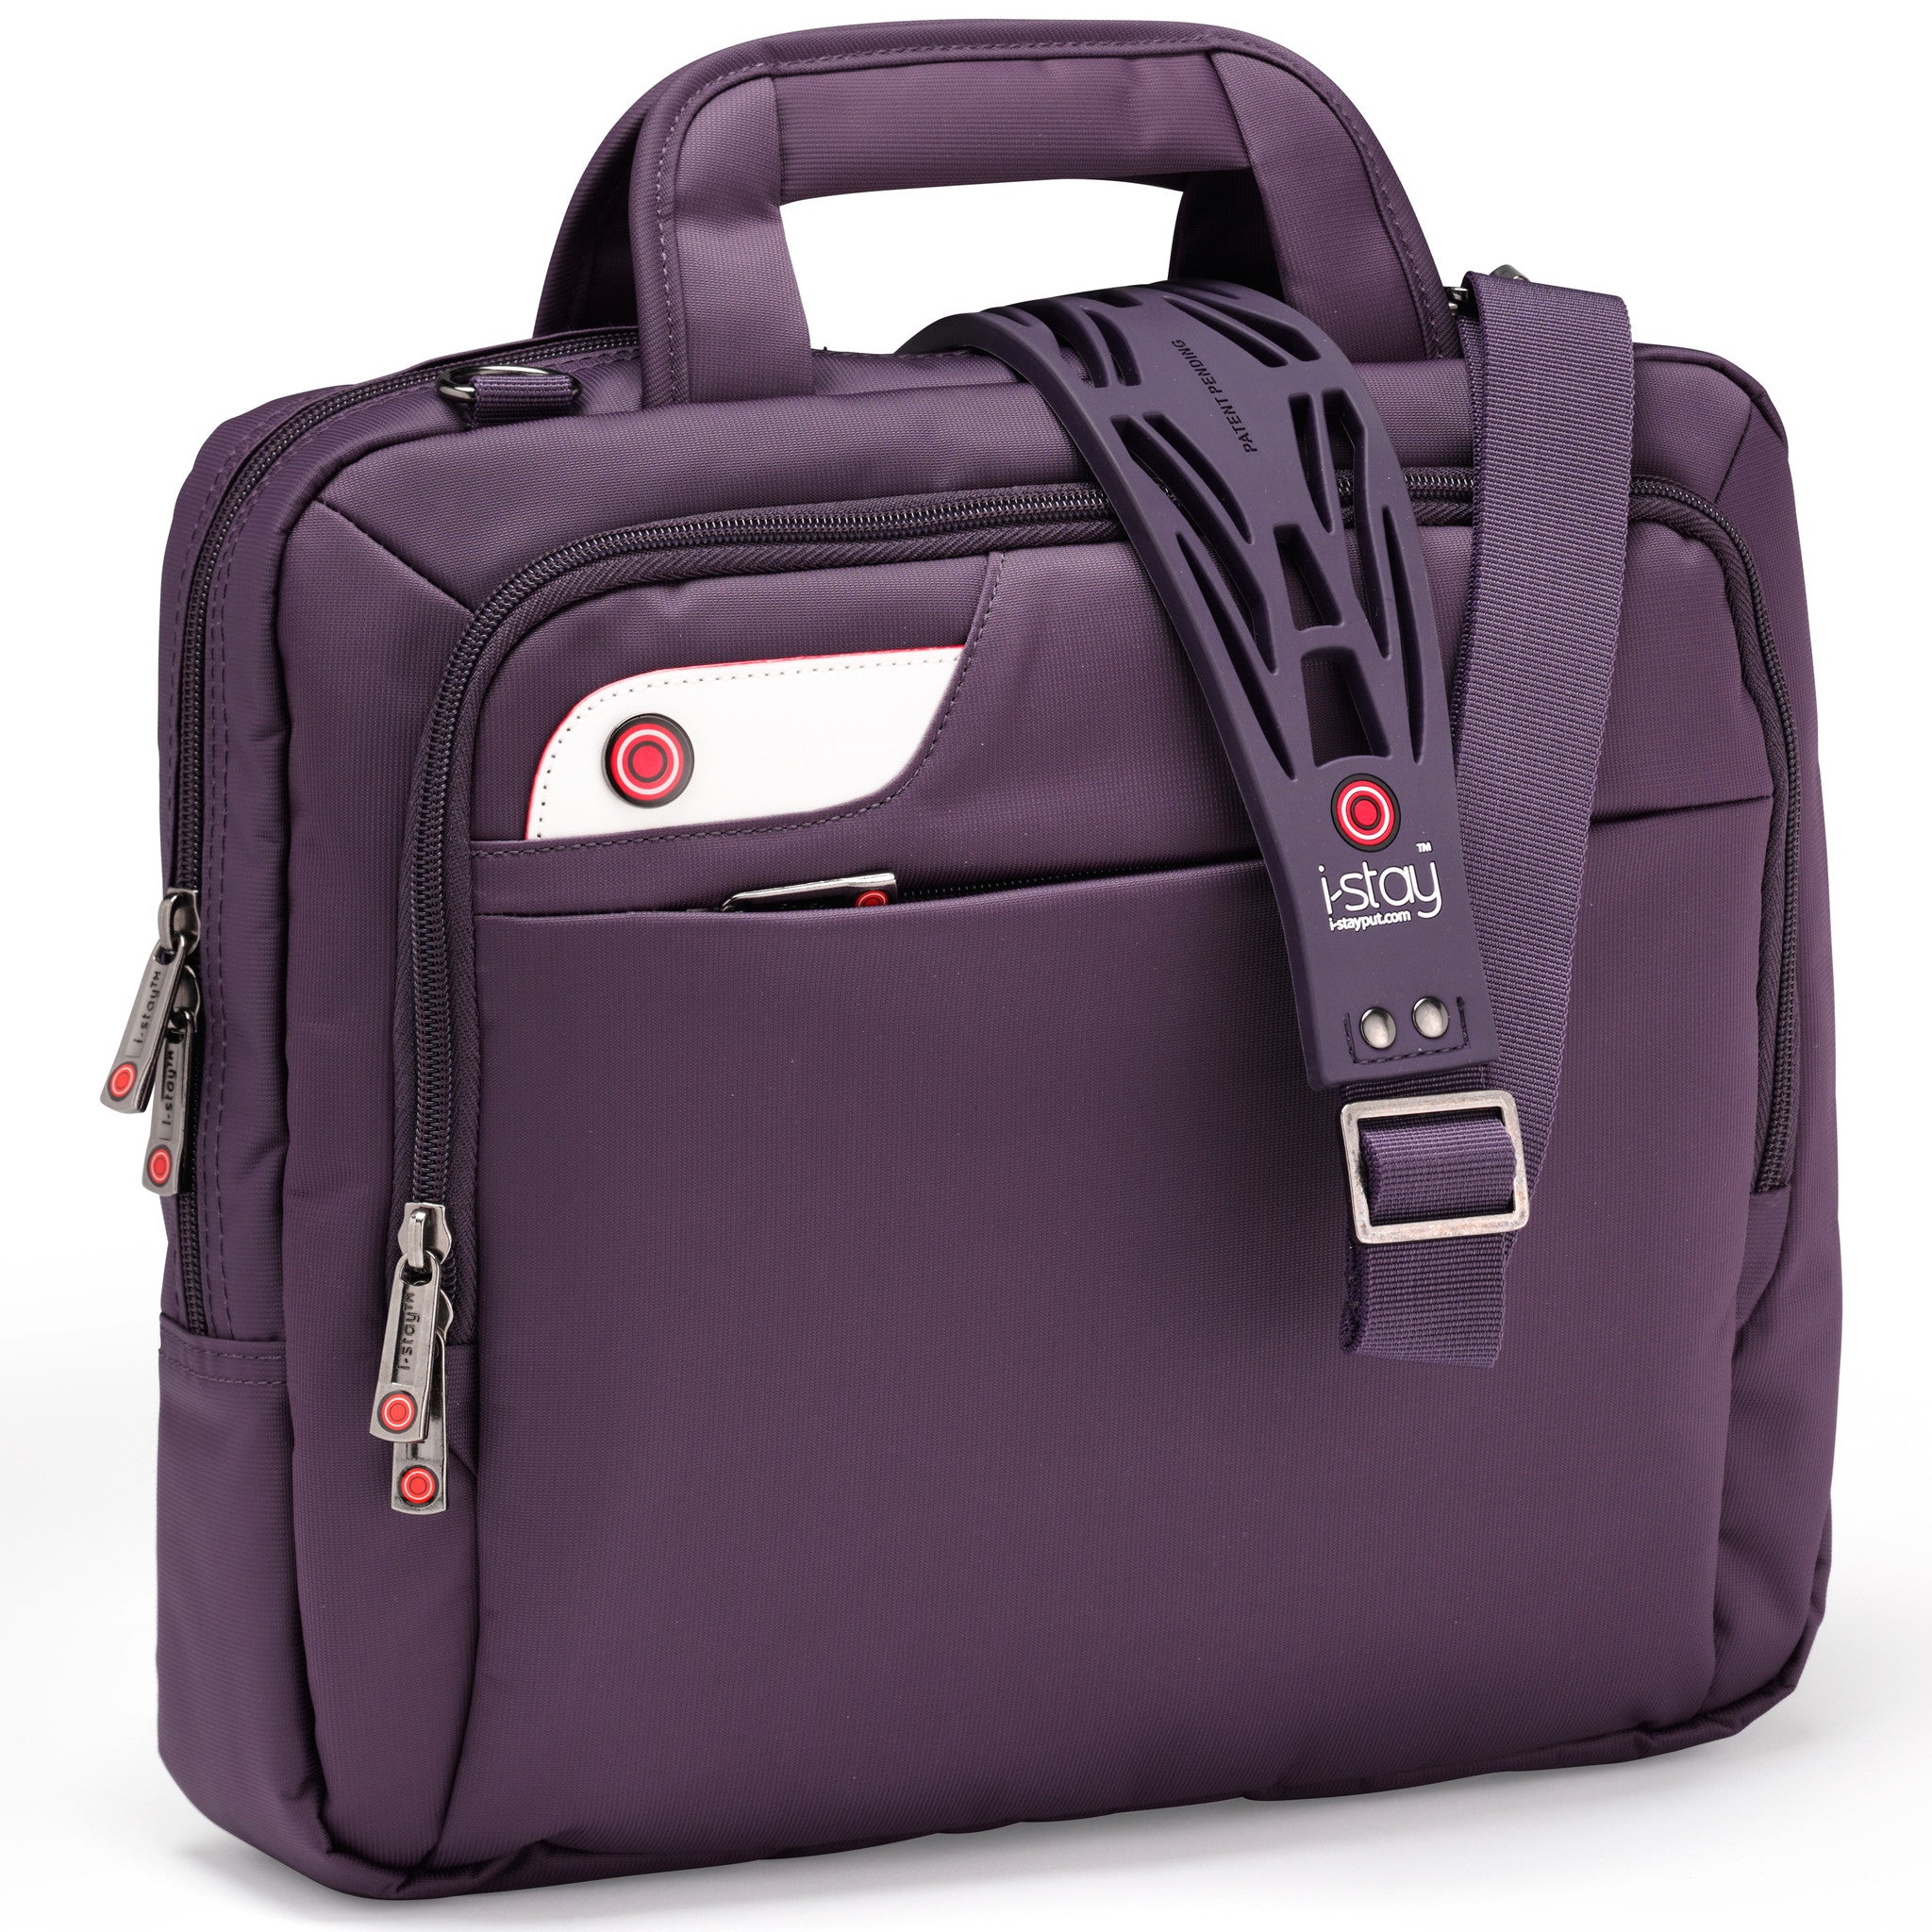 i-stay Launch Surface Pro/Tablet/Netbook Bag in purple (is0127, 13.3